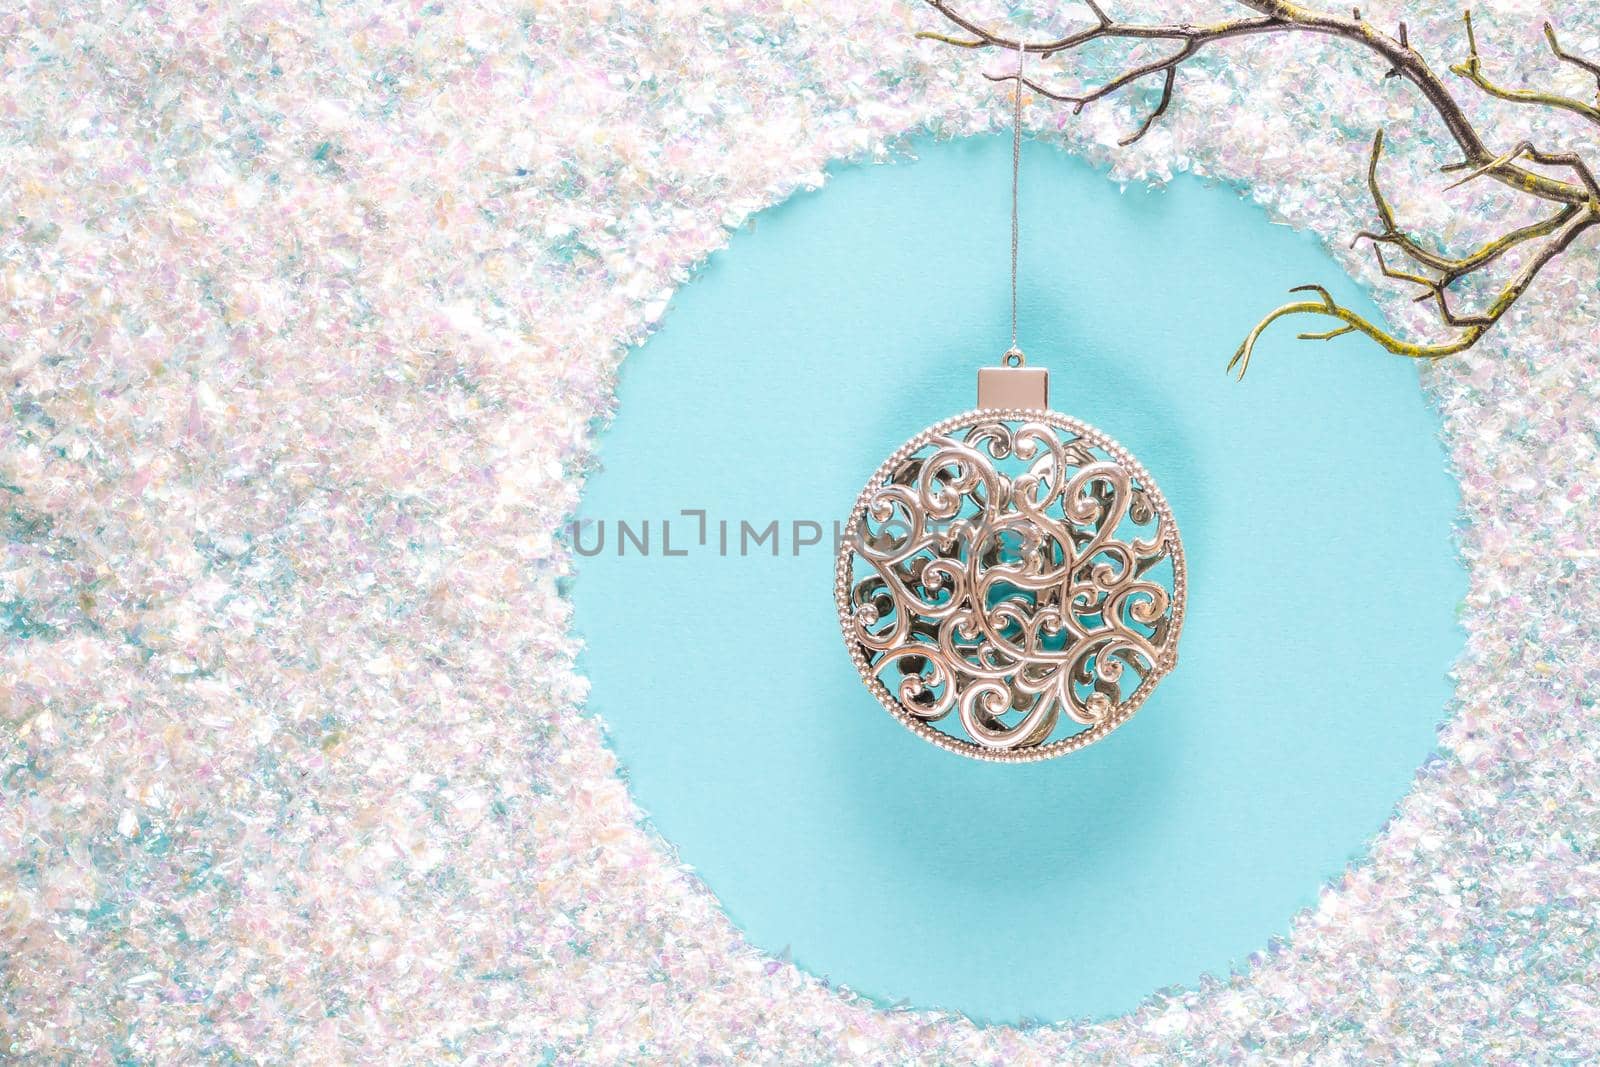 Modern Christmas holiday ornament decorations in contemporary trendy blue and white colors with sparkling glitter on blue background. Flat lay with copy space by Mariakray